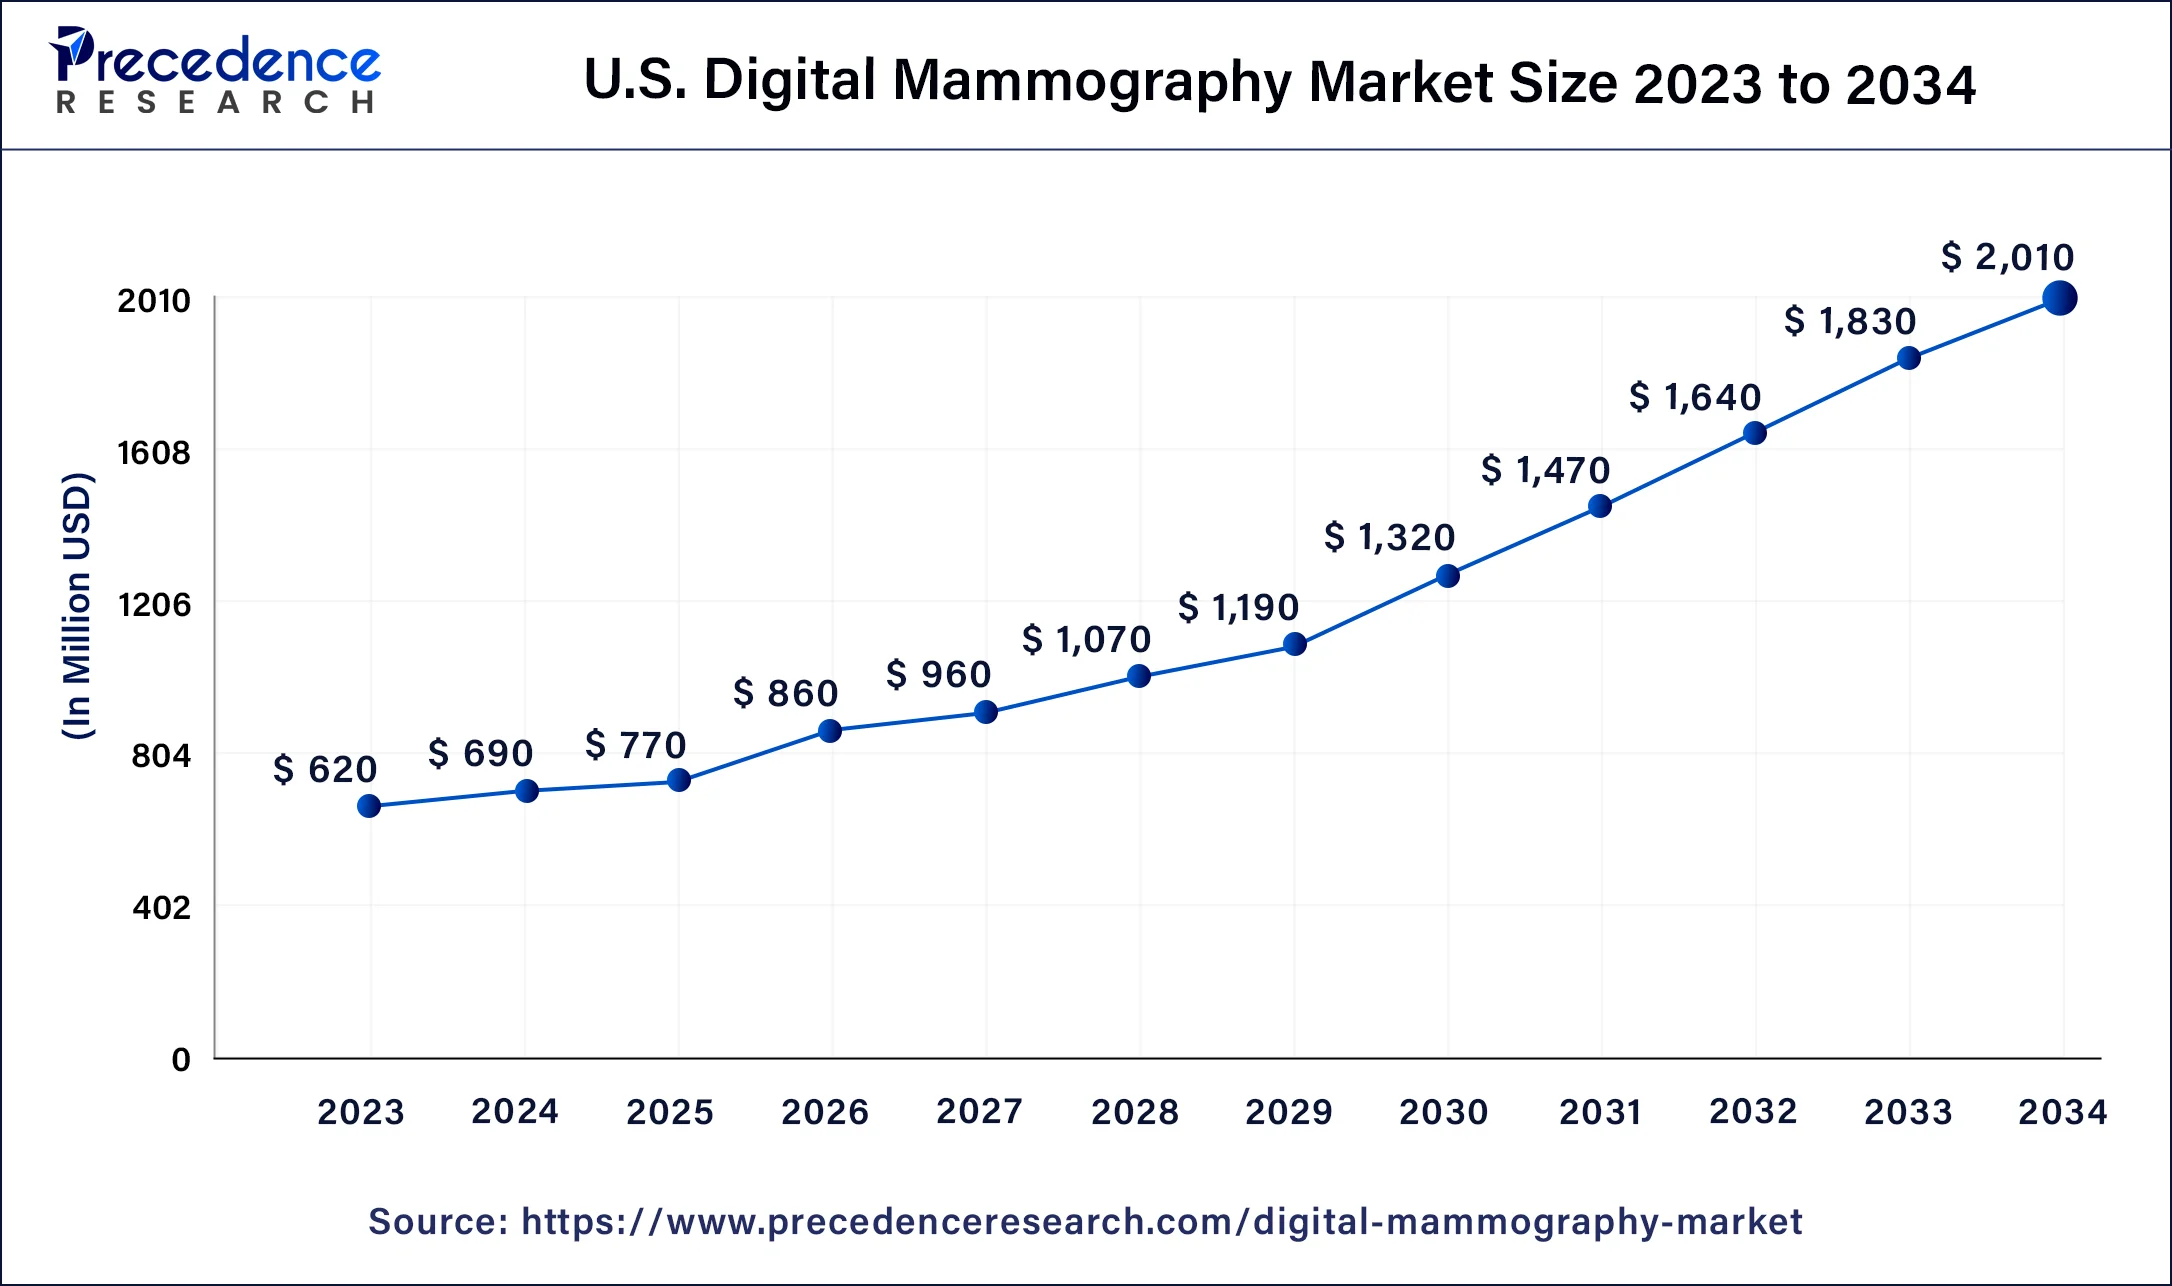 Asia Pacific Digital Mammography Market Size 2024 to 2034